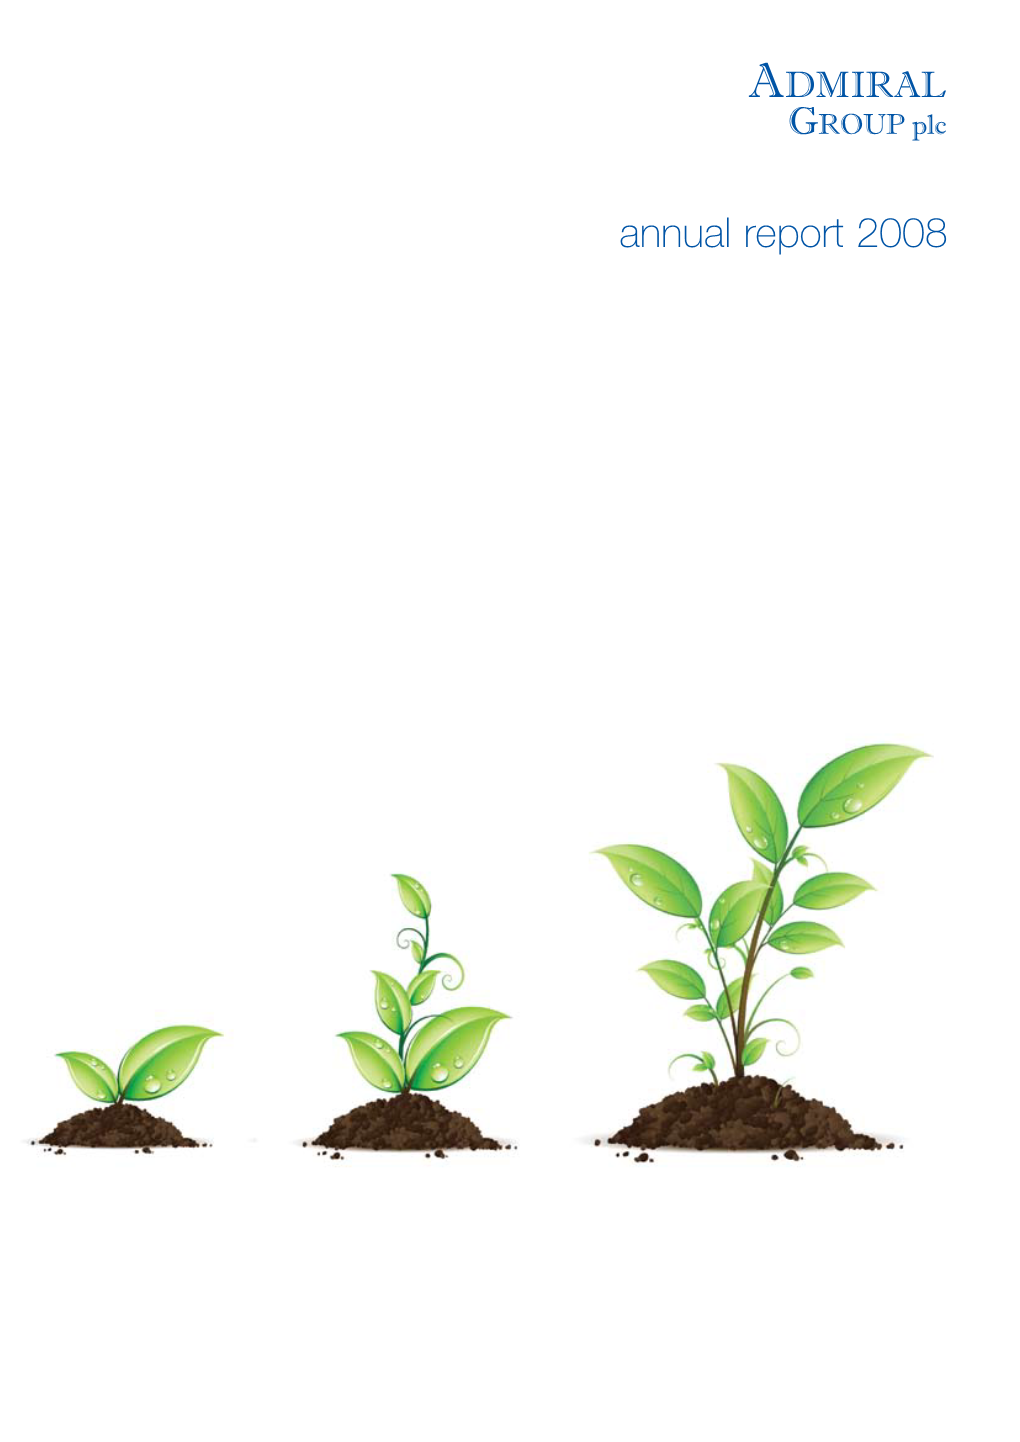 Annual Report 2008 in 2008 in Group Admiral Admiral Group in 2008 Contents